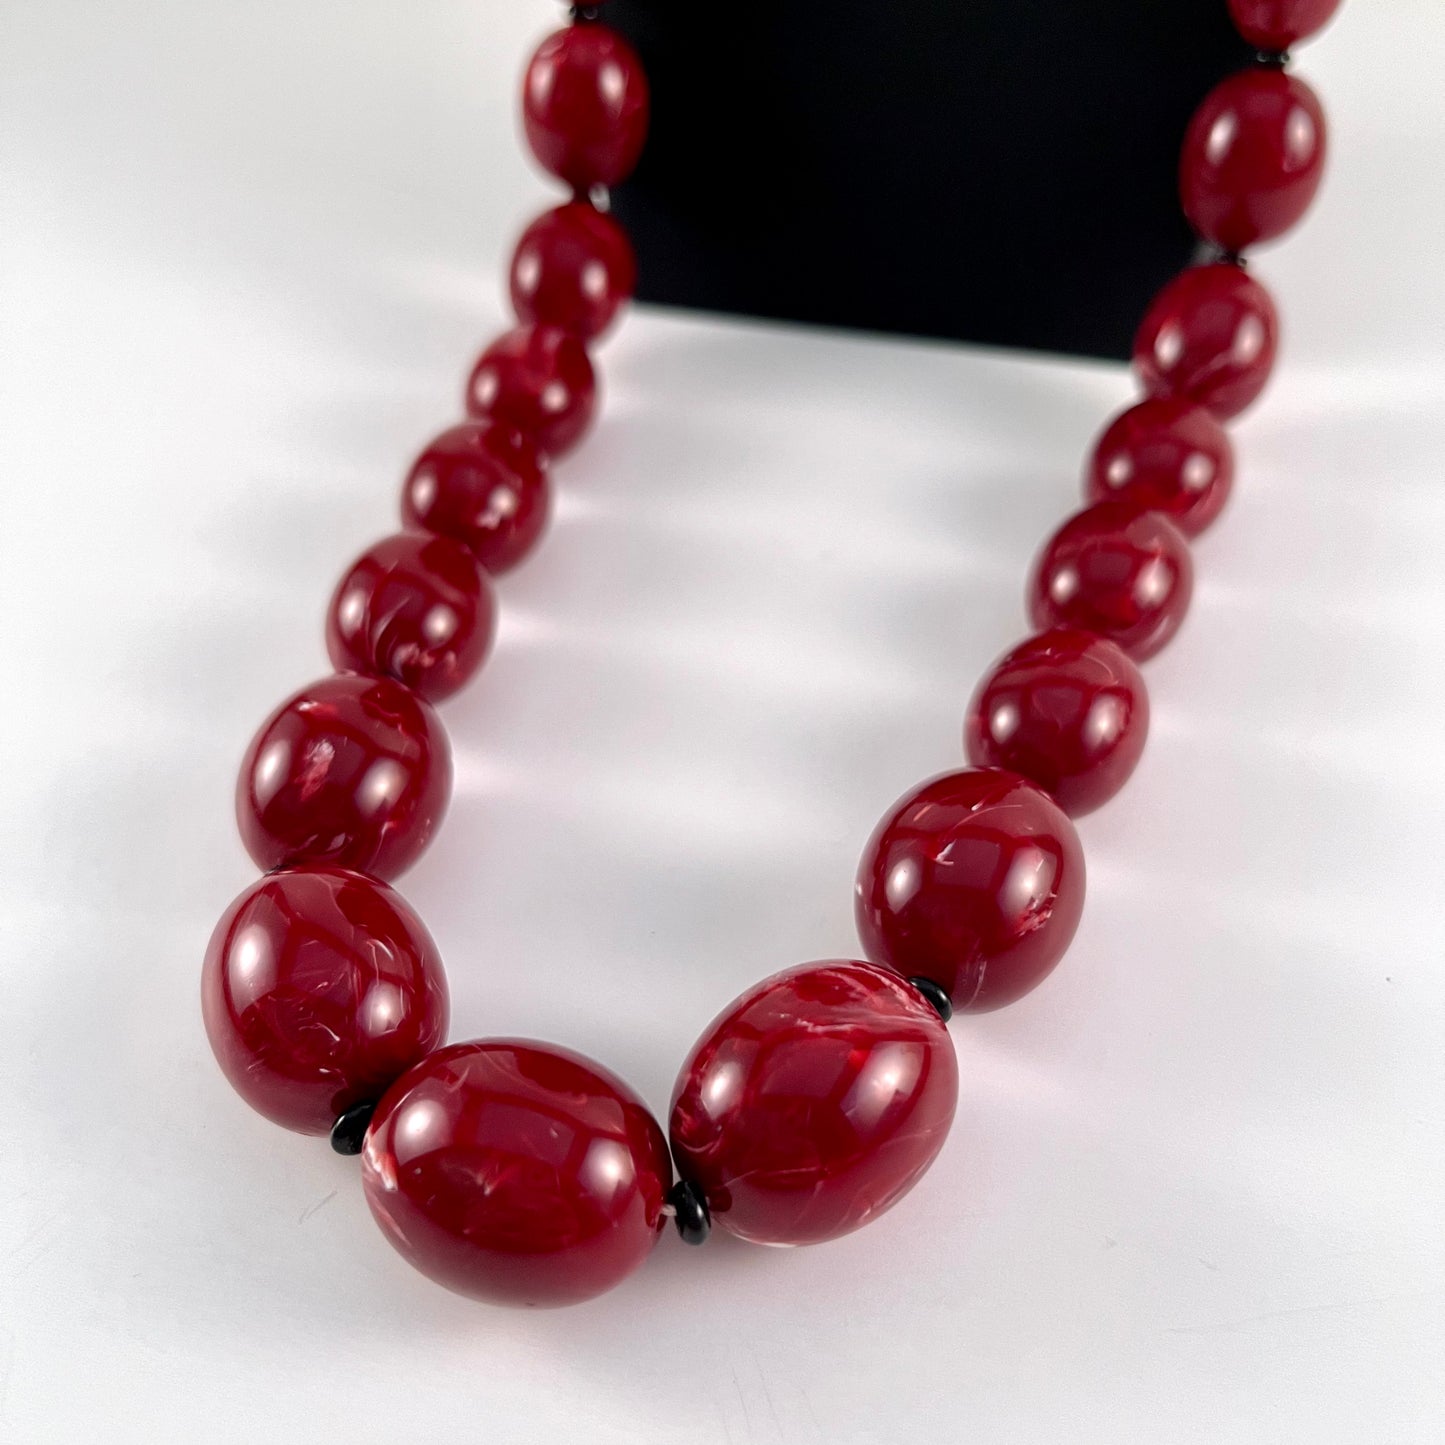 Late 70s/ Early 80s Monet Burgundy Bead Necklace